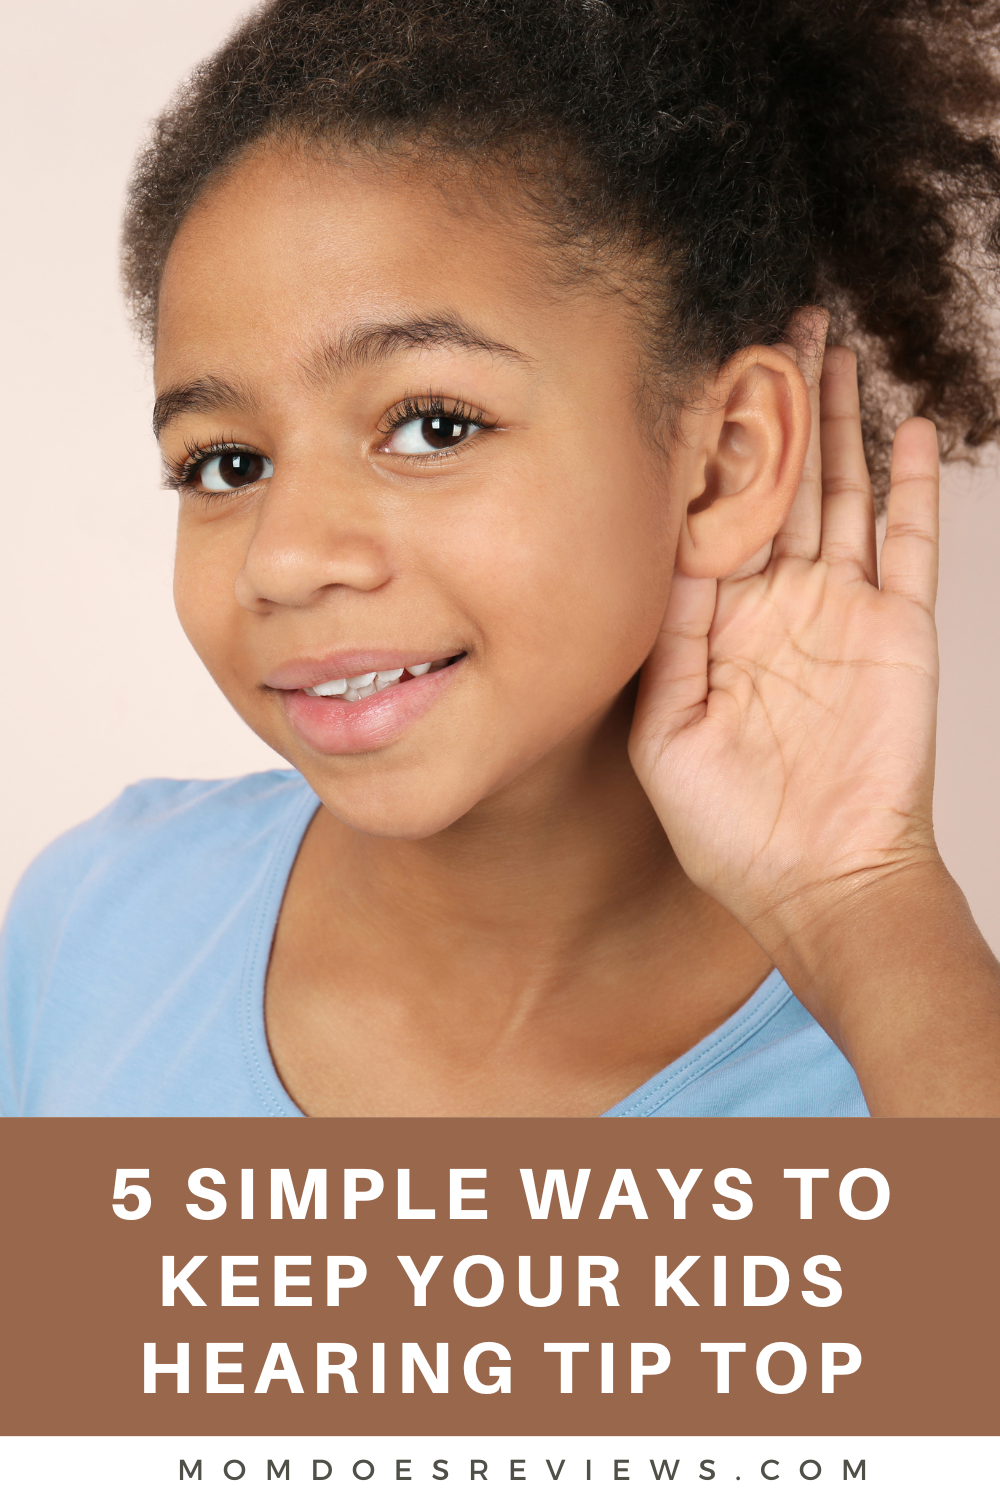 5 Simple Ways to Keep Your Kids Hearing Tip Top